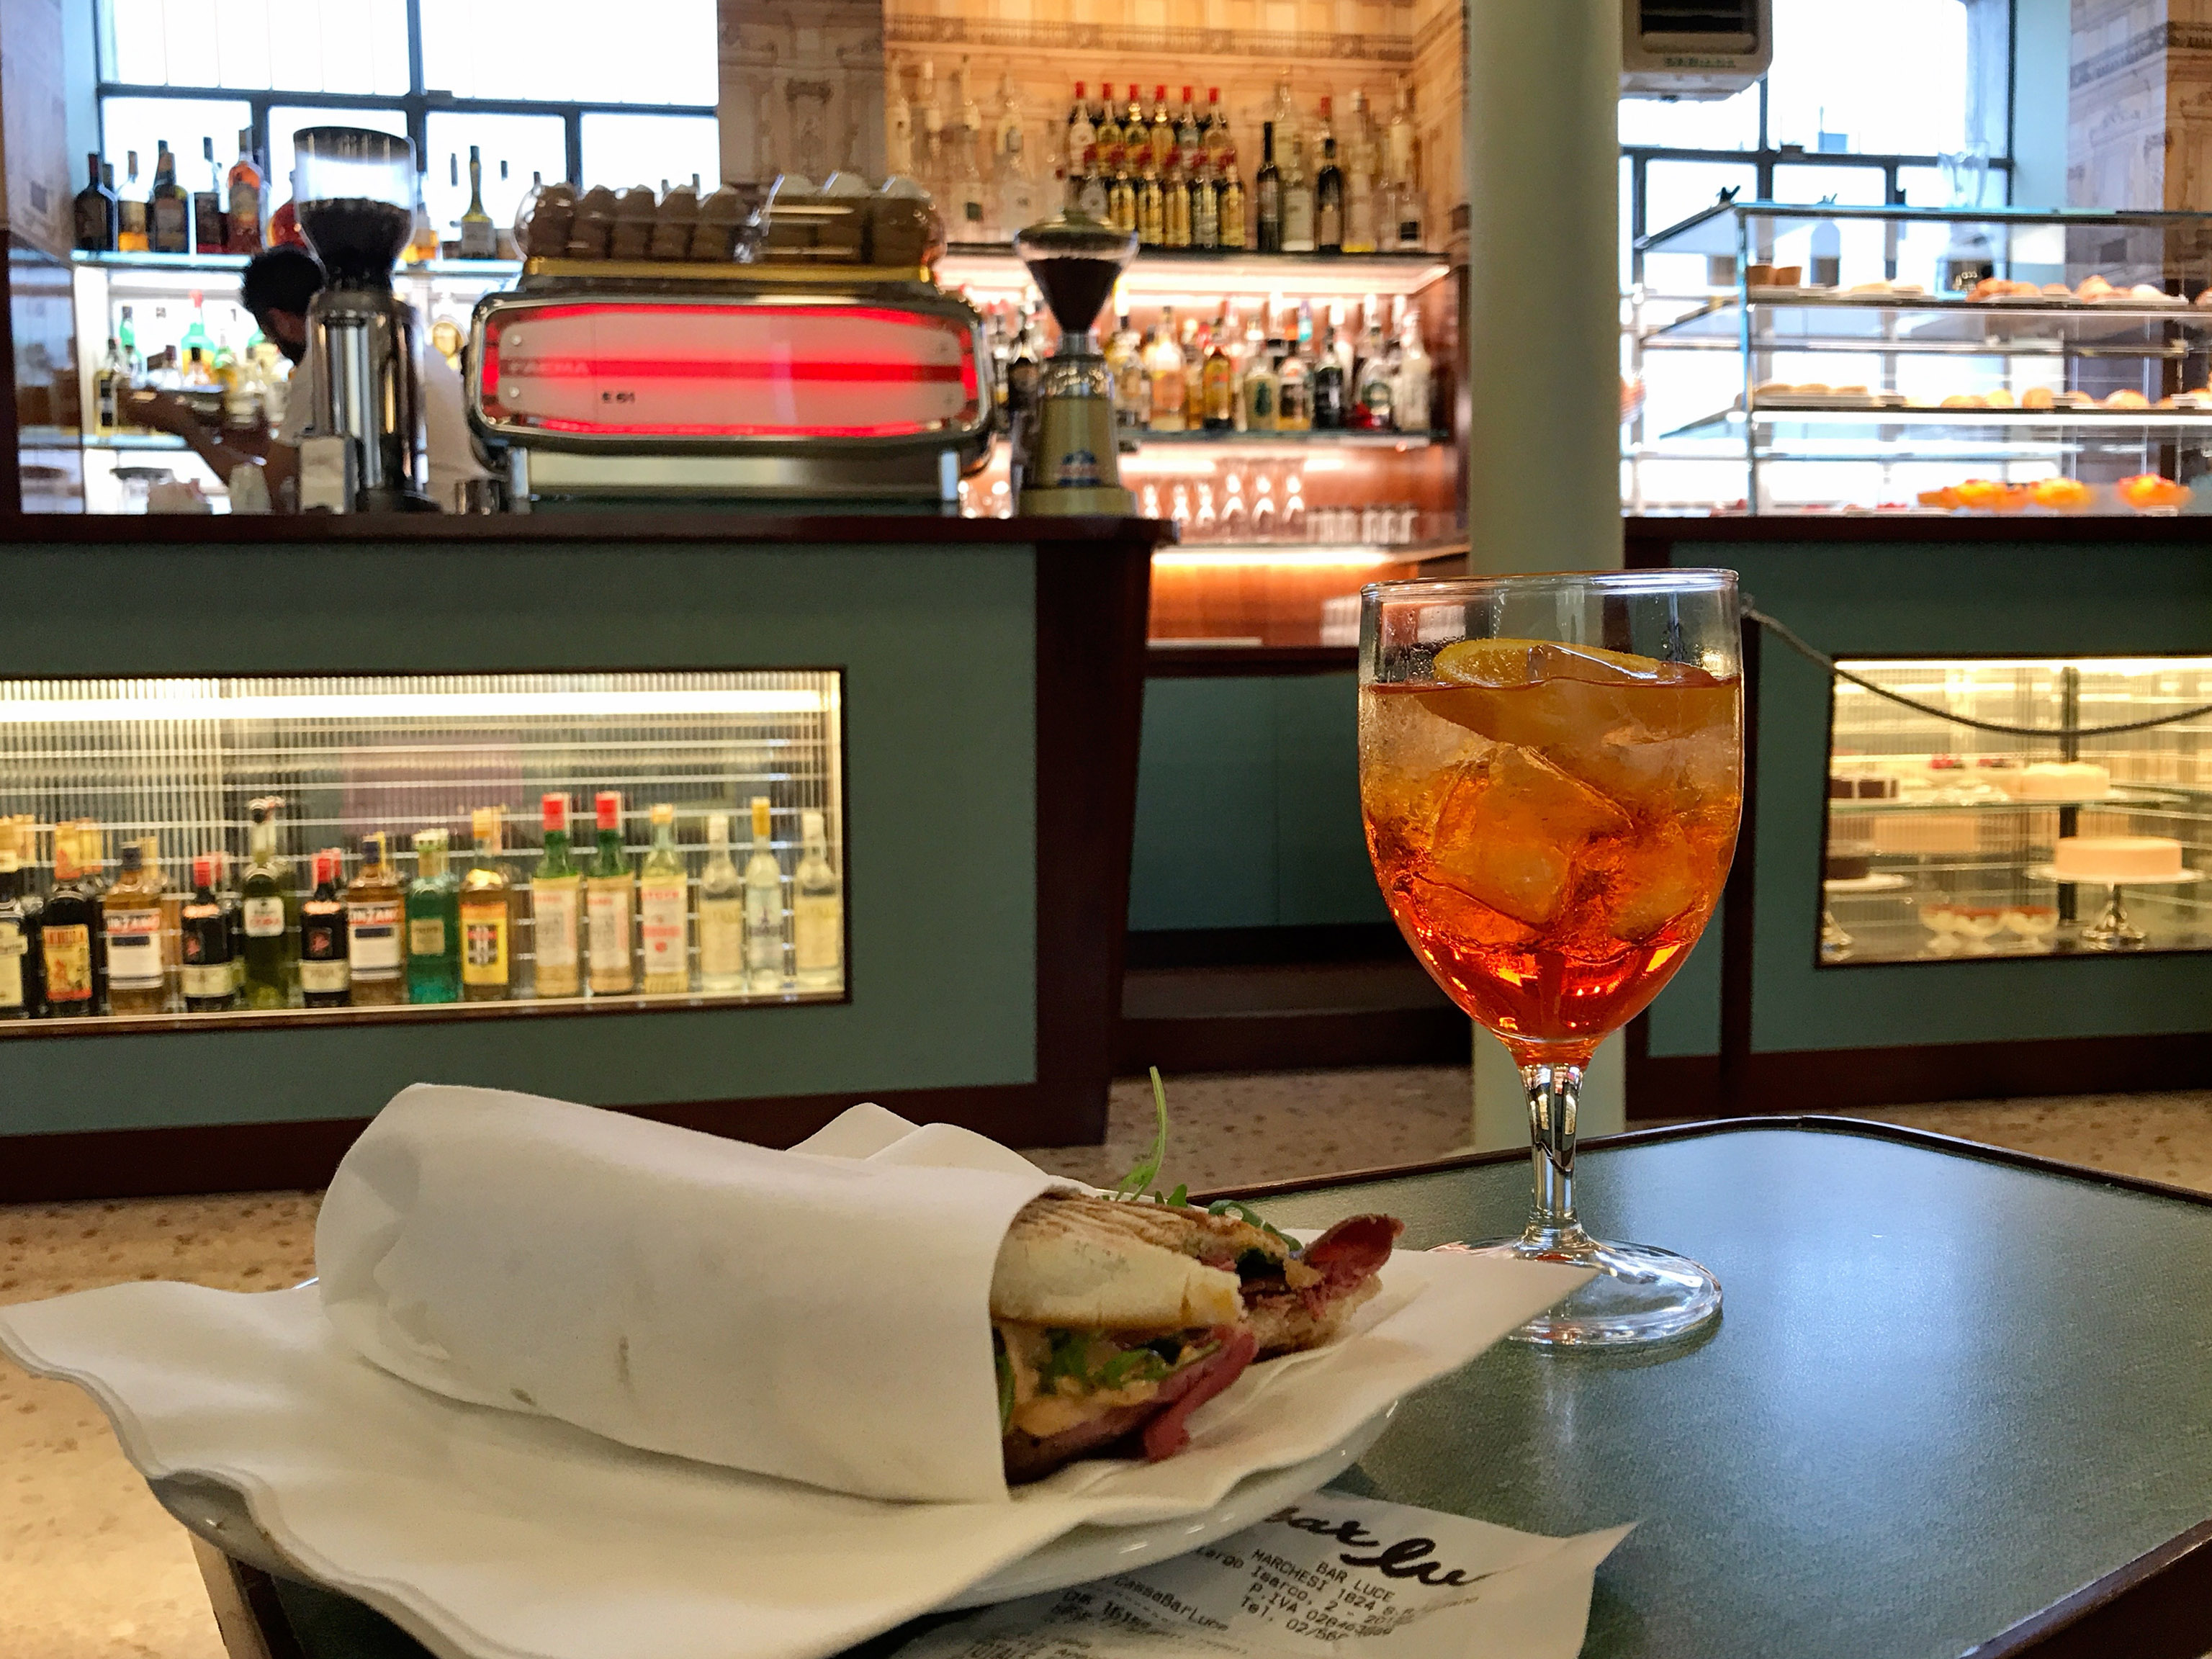 A roast beef panino and an Aperol Spritz were on the late lunch menu for The Ruggist at Bar Luce. | Image by The Ruggist.